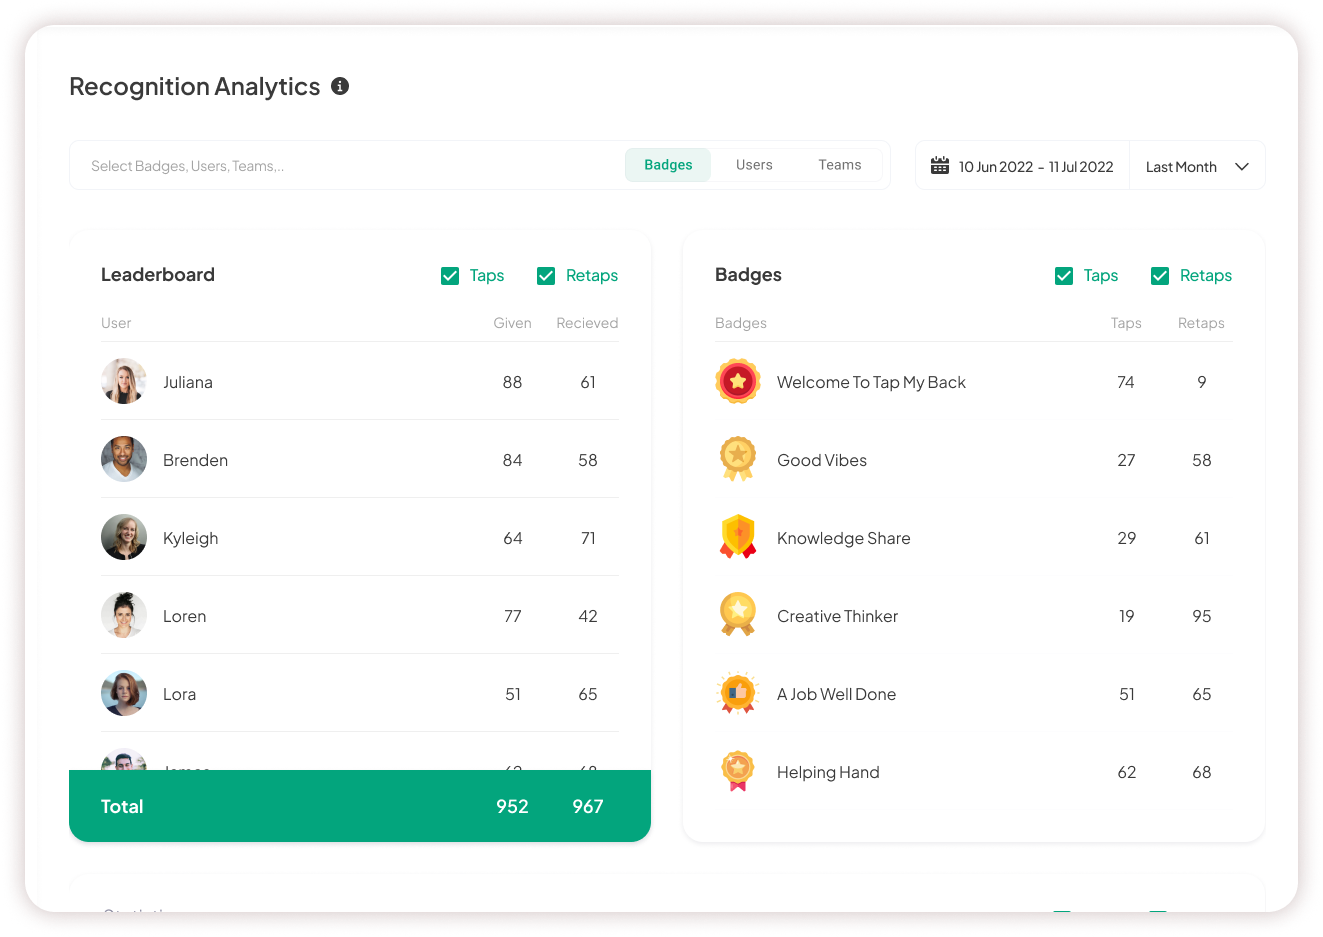 Recognition Analytics dashboard and leaderboard